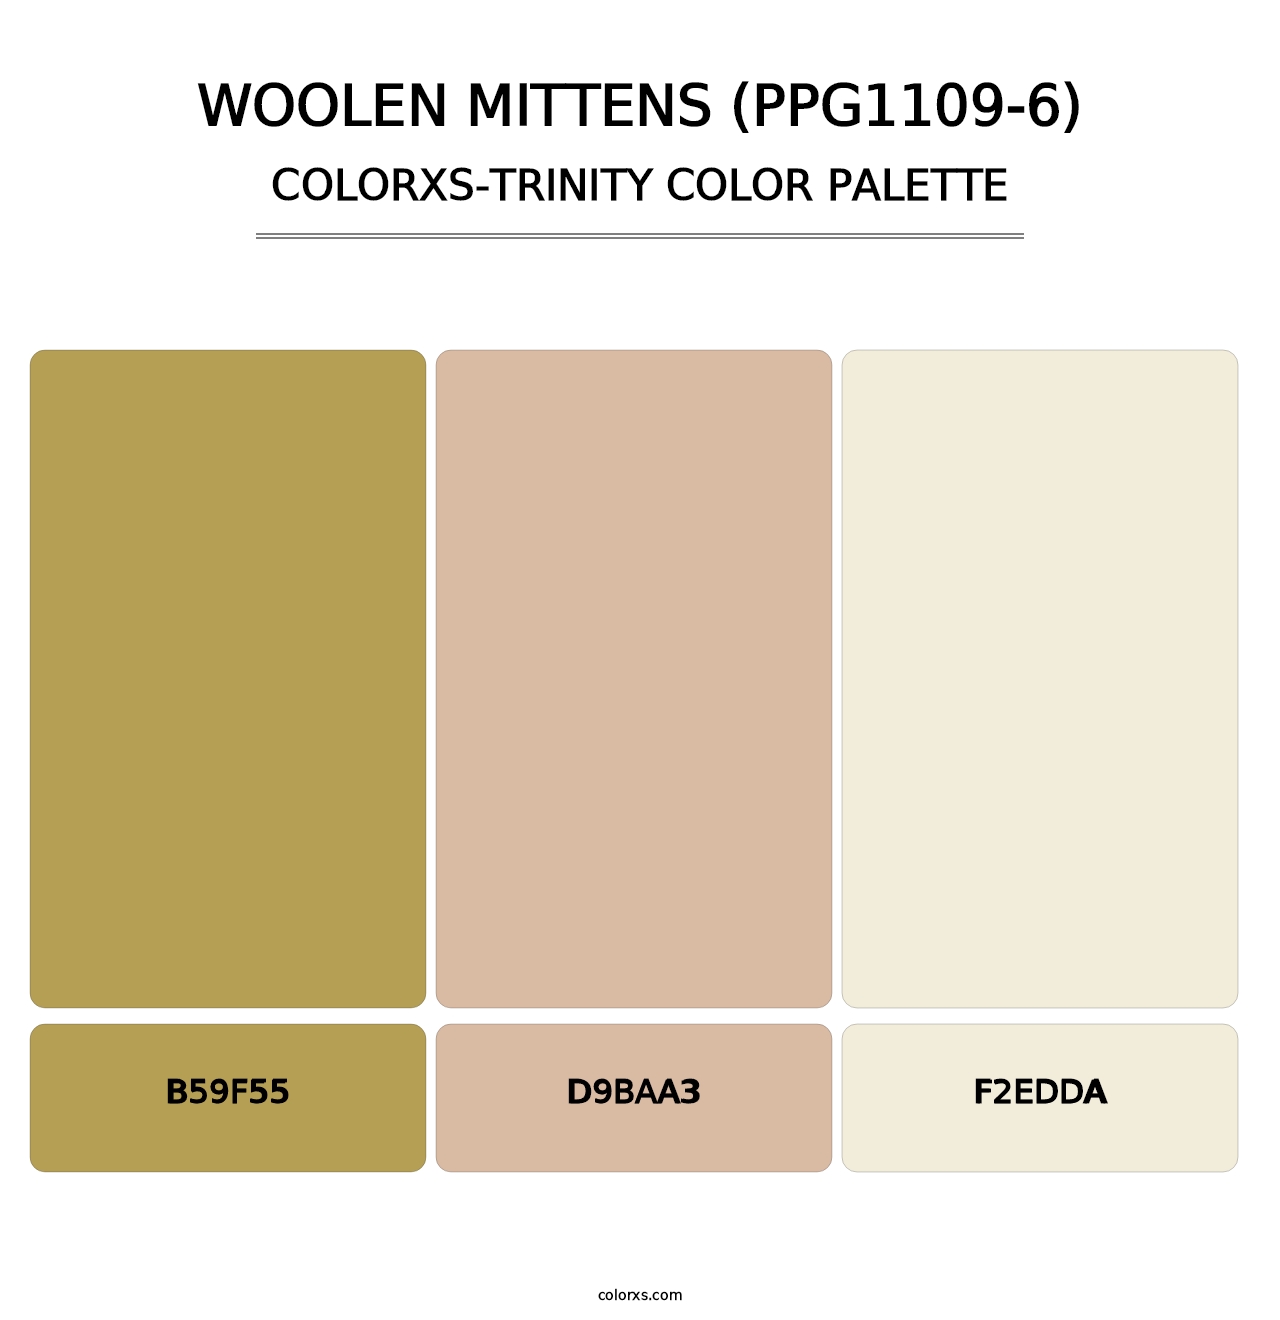 Woolen Mittens (PPG1109-6) - Colorxs Trinity Palette